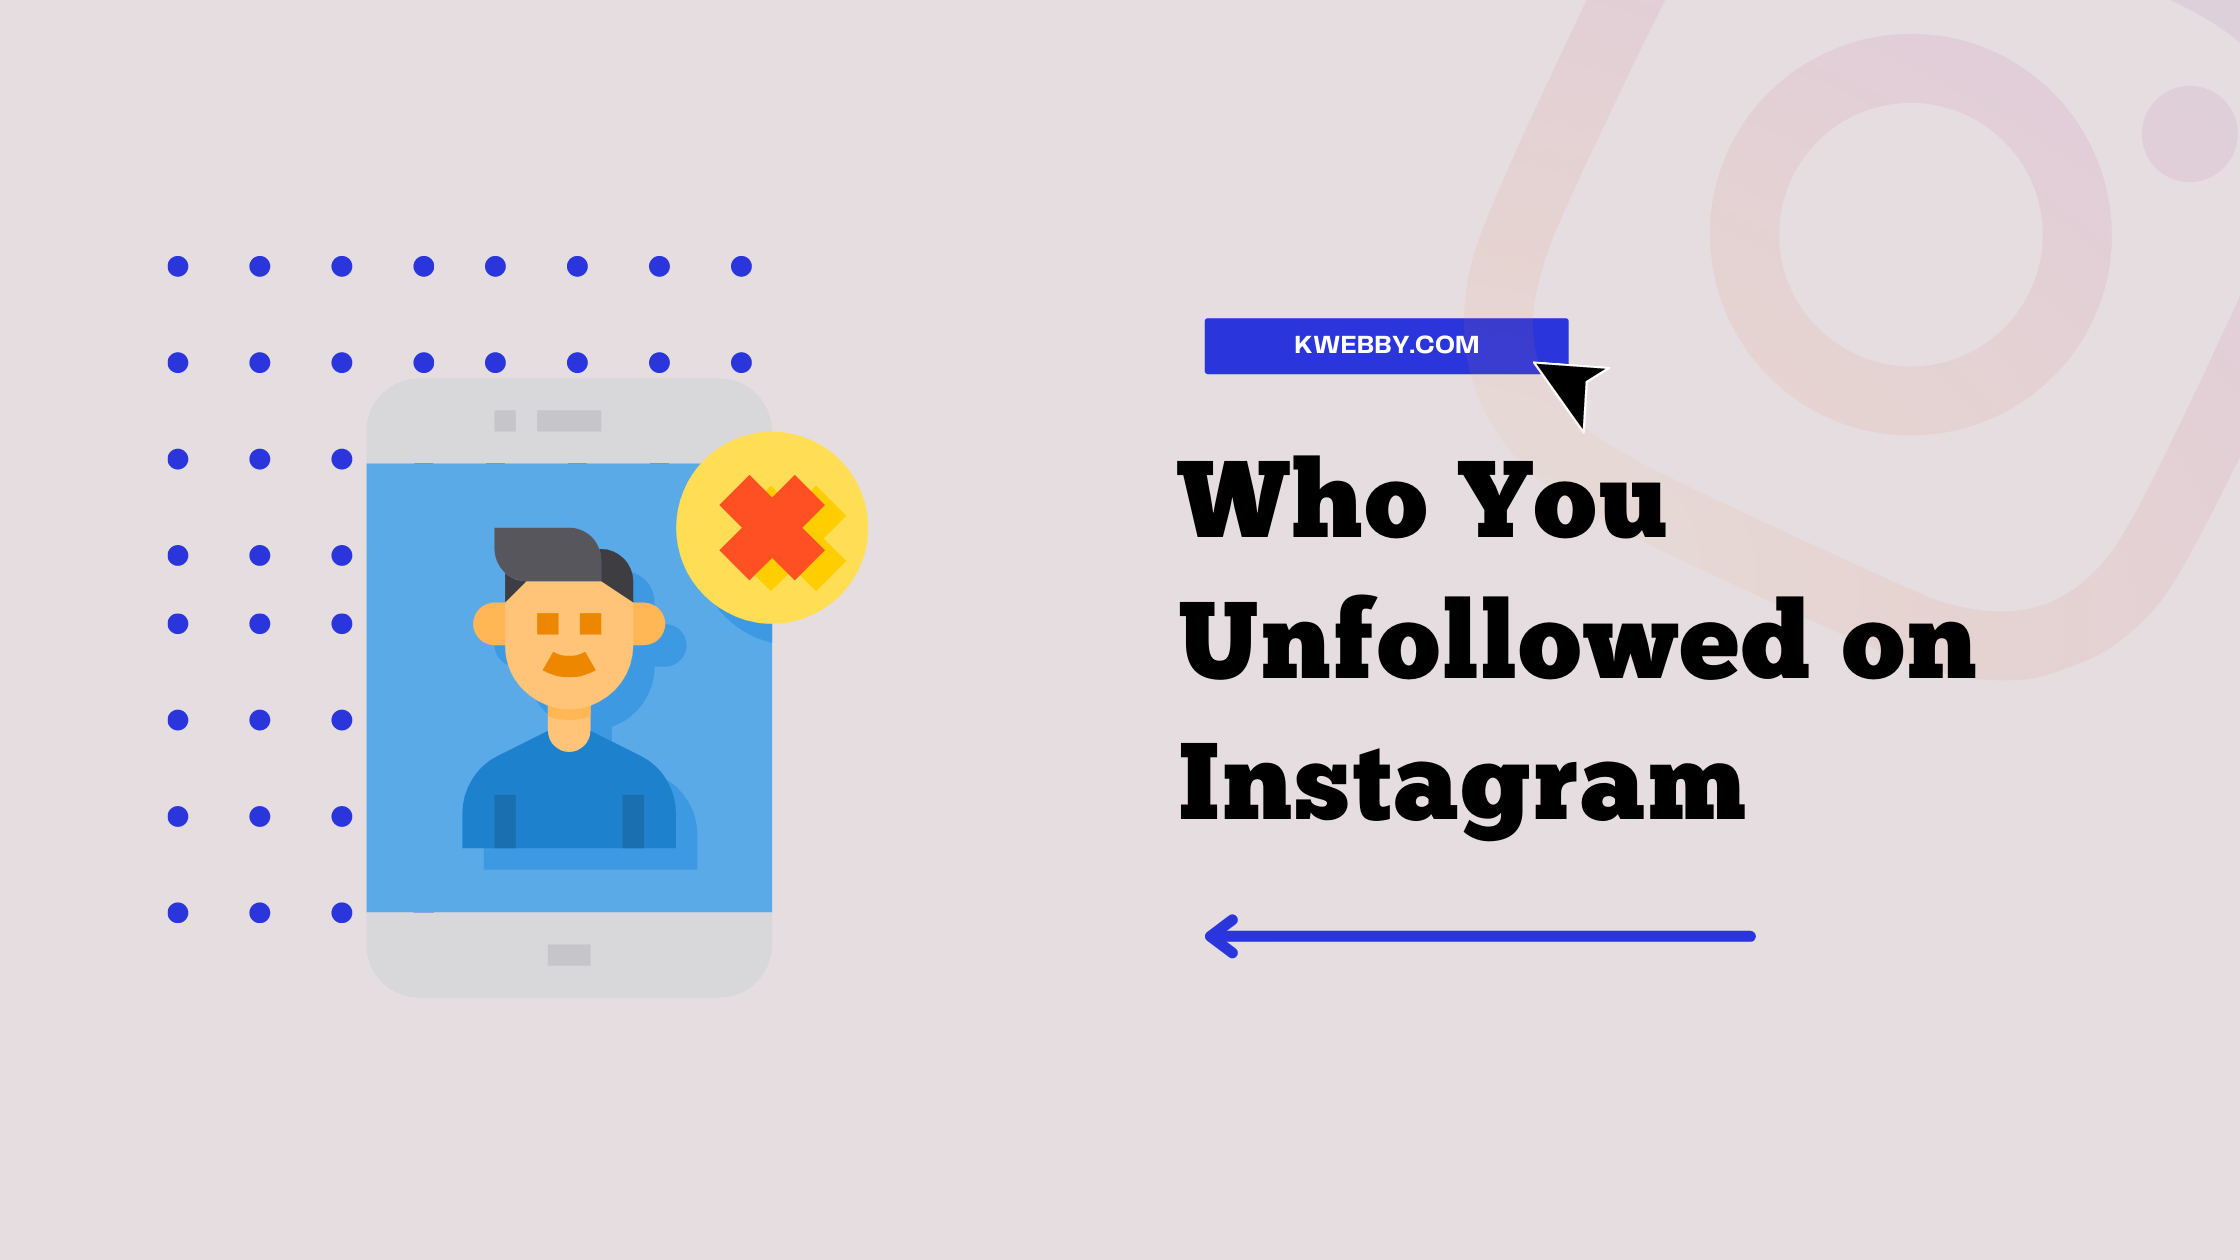 who you unfollowed on Instagram